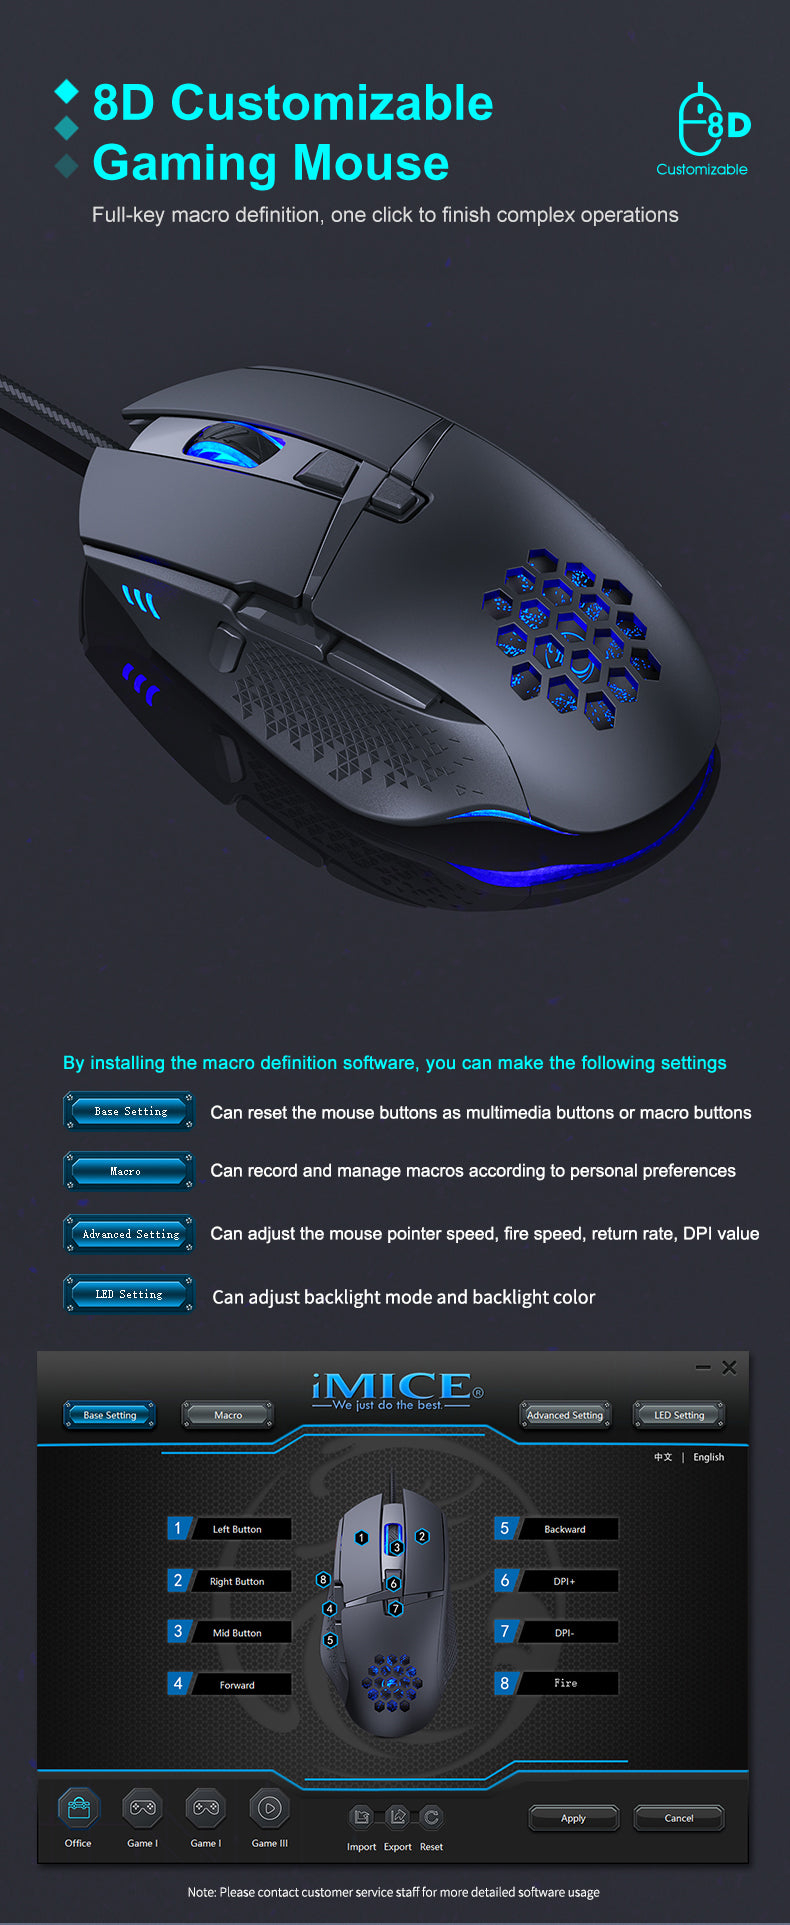 Wired LED Gaming Mouse 7200 DPI RGB optical Mice With Backlit